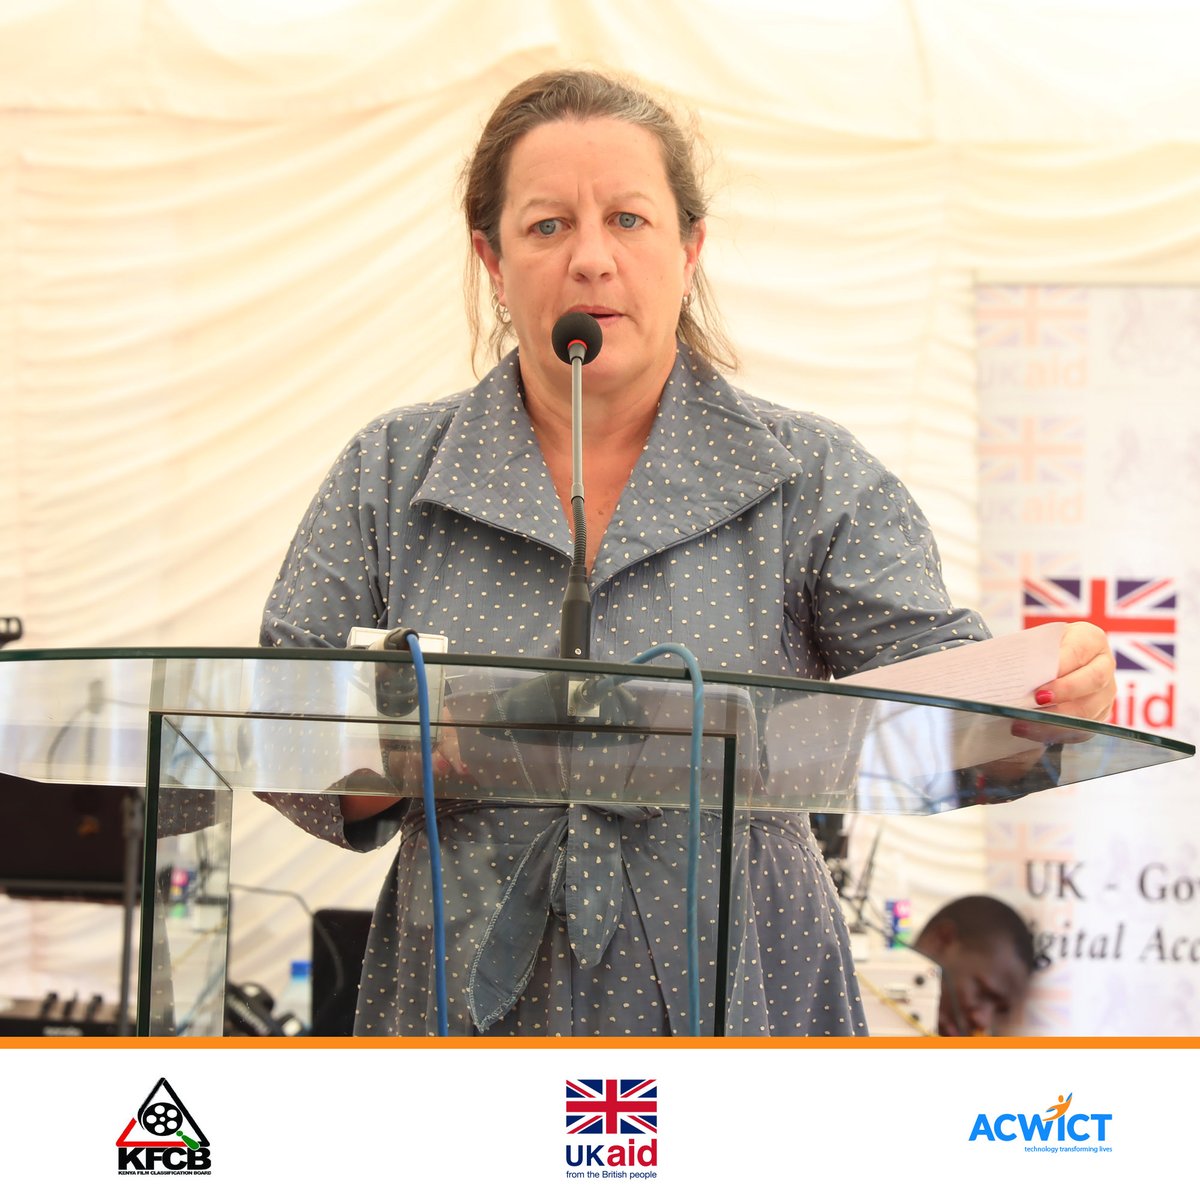 We wish to thank all the special guests from @InfoKfcb  and the @UKaid for participating in the Covid-19 & Digital Employability Programme Graduation which took place last week on Thursday. 

#acwict #technology #womenempowerement #kfcb #ukaid #technologytransforminglives